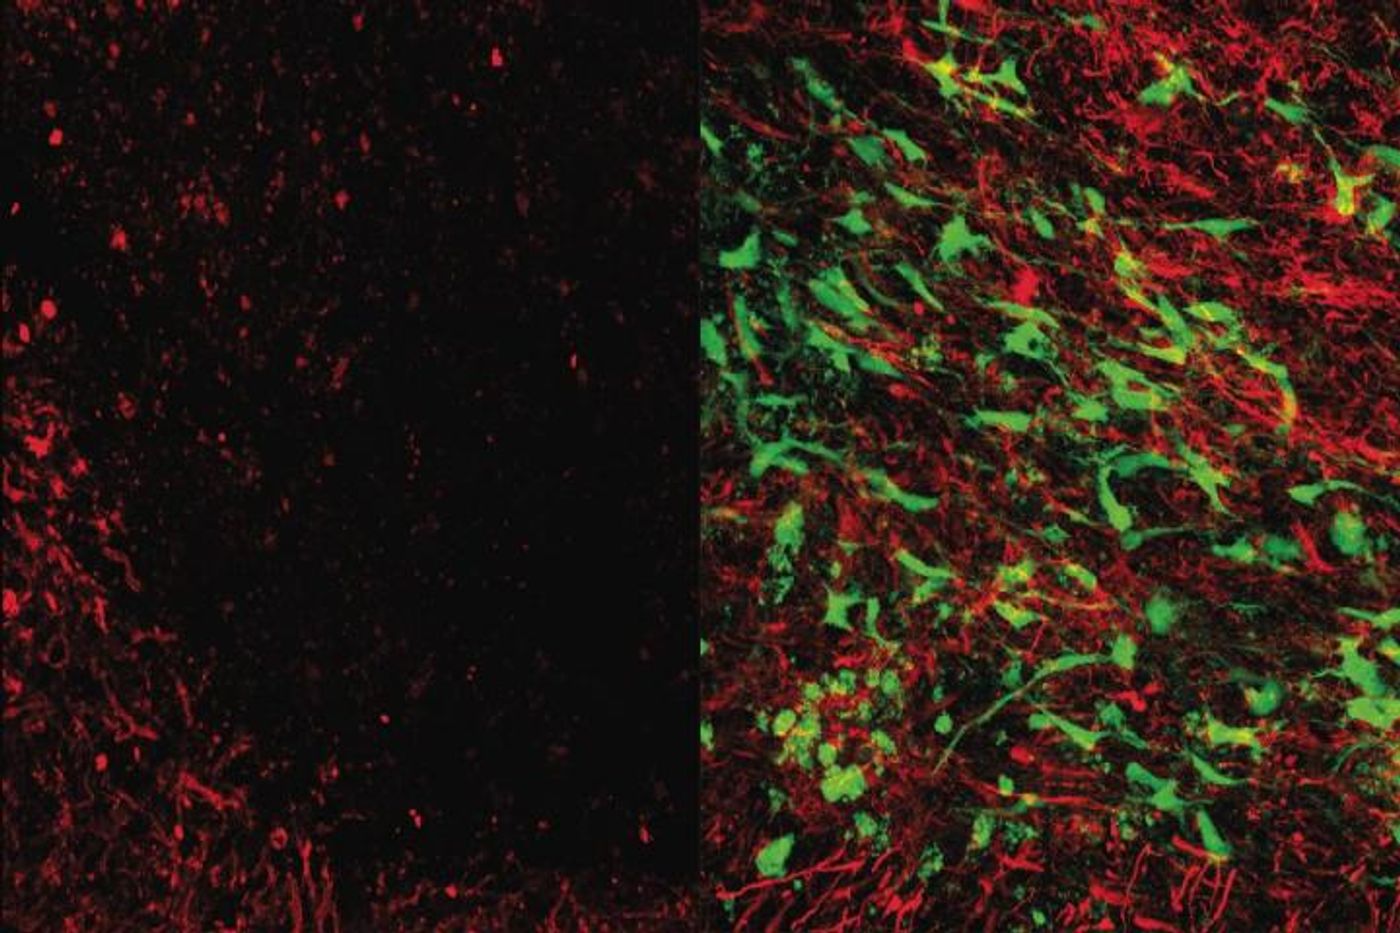 Brain tissue that's been damaged by white matter stroke (left) and treated with glial cell therapy (right). Myelin (red) protects neuronal connections and is in a white matter stroke. Glial cell therapy (green) helps restore lost myelin, improves connections. Credit: UCLA Broad Stem Cell Research Center/Science Translational Medicine